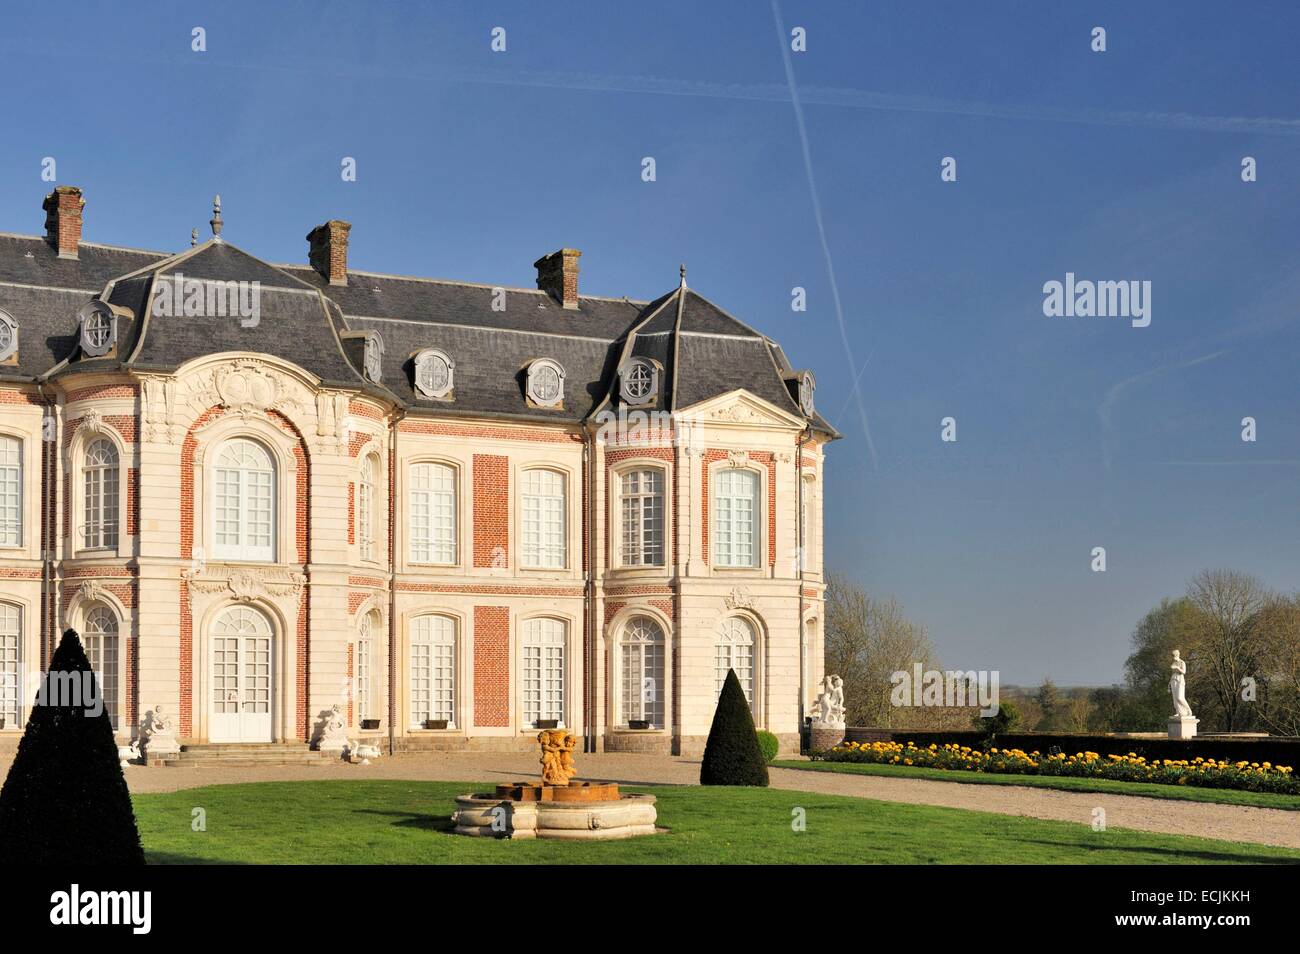 France, Somme, Long, castle of Long built in 1733 and its garden Stock Photo